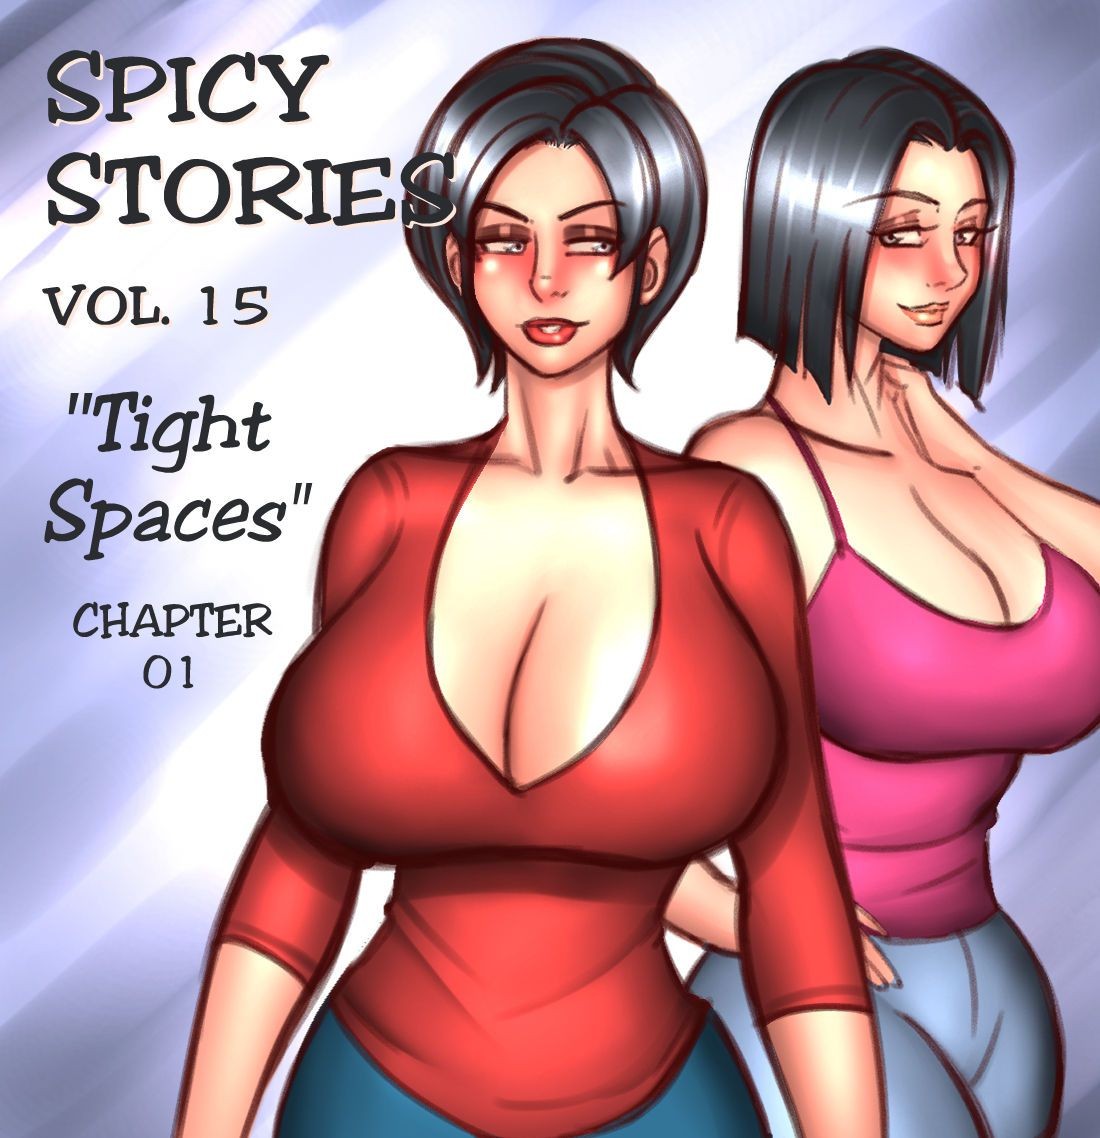 Alternative NGT Spicy Stories 15 - Tight Spaces (Ongoing) NGT Spicy Stories 15 - Tight Spaces (Ongoing) Pelada